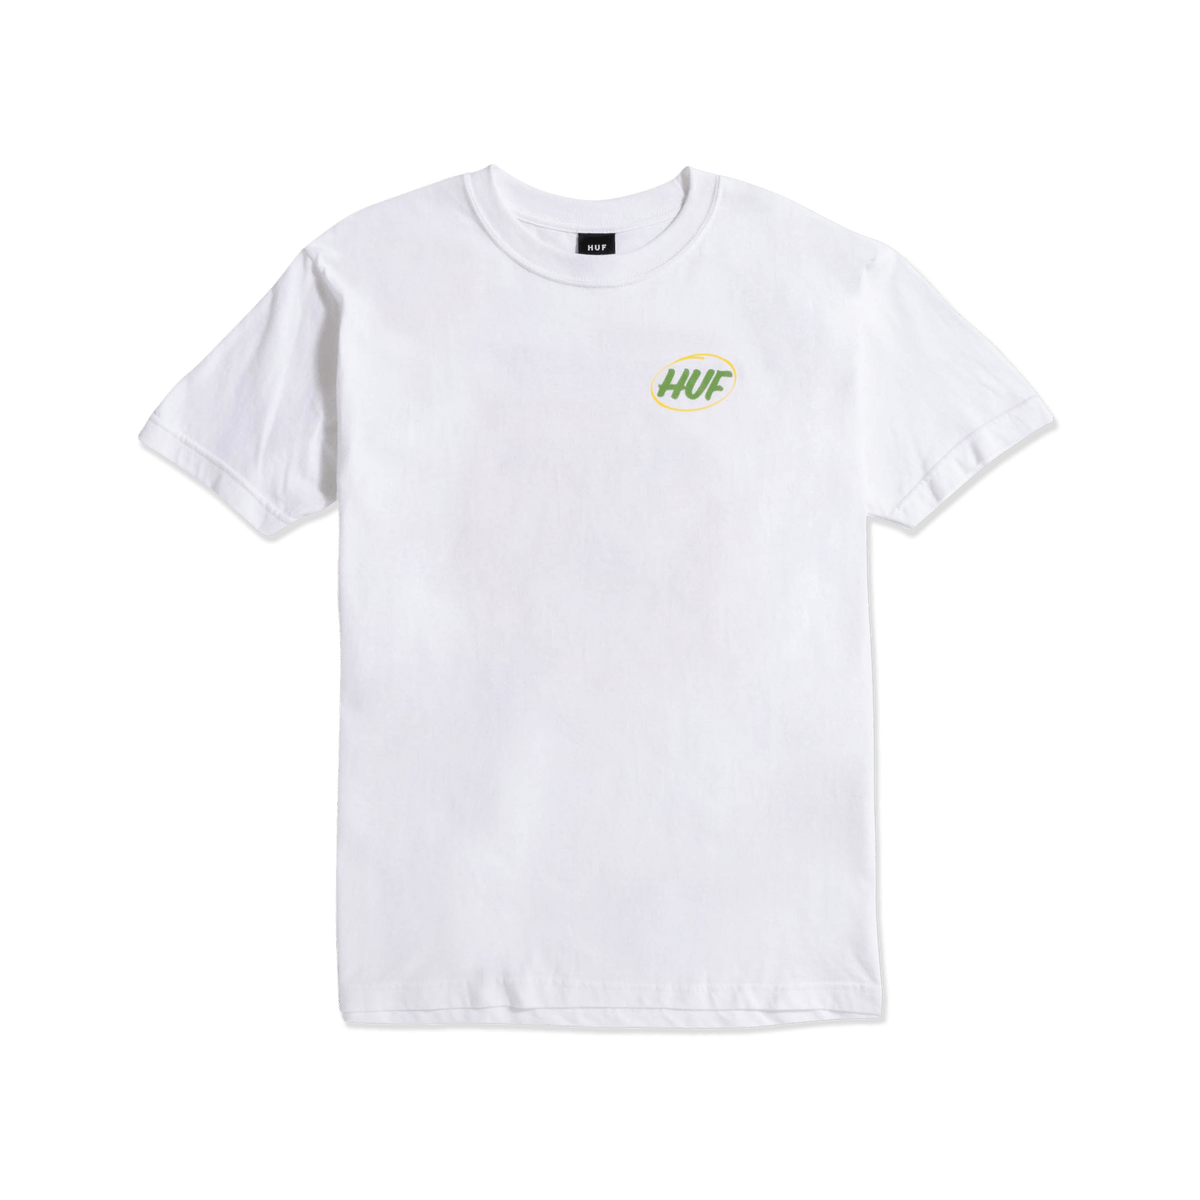 Huf Local Support Short Sleeves T-Shirt White TS01950 - APLAZE